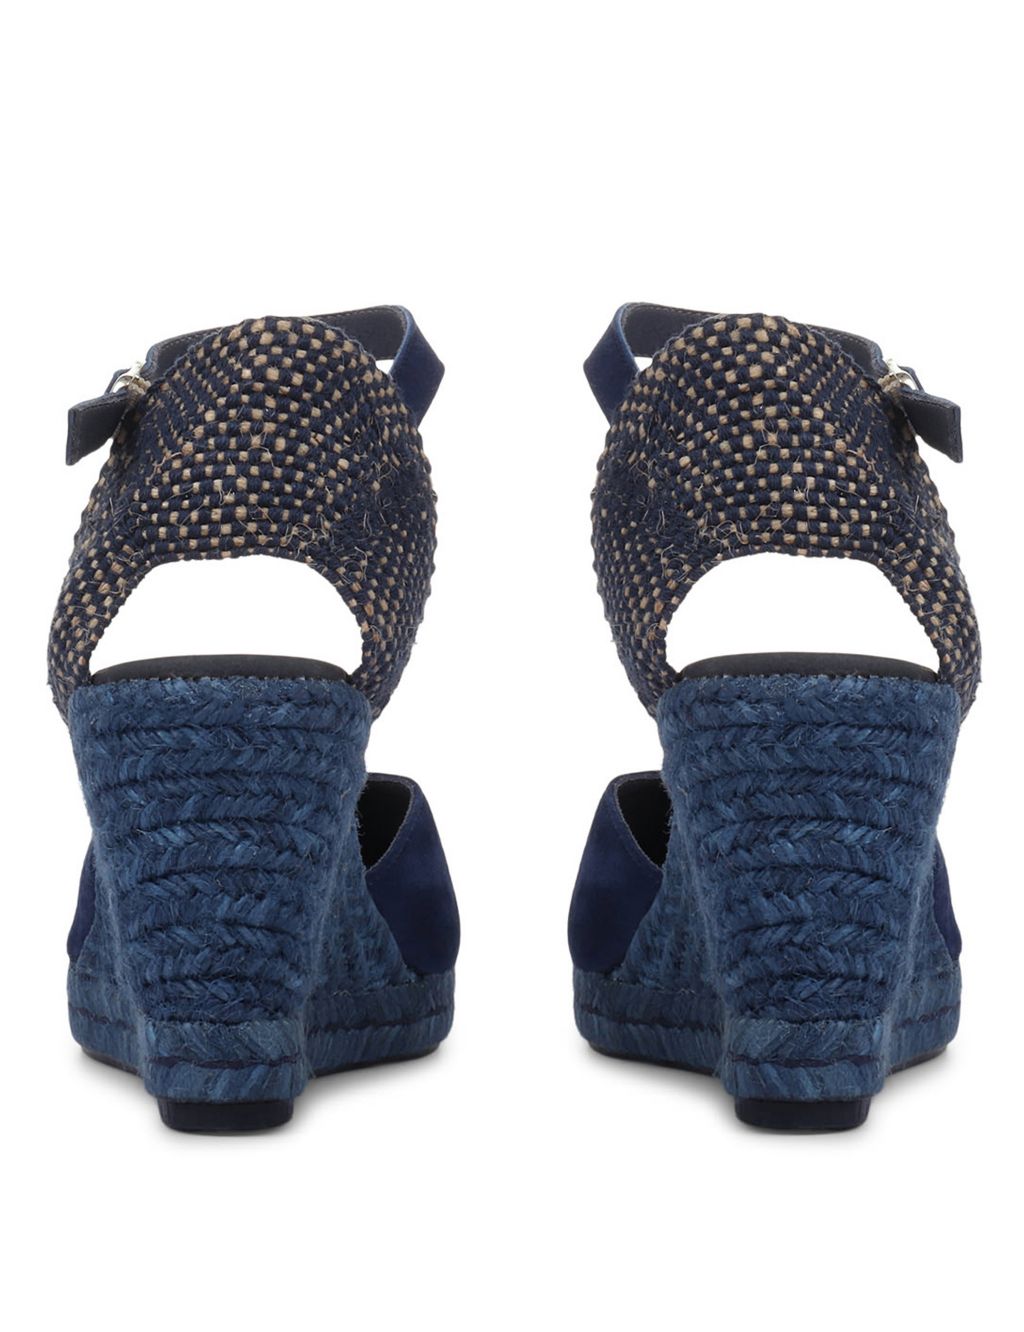 Suede Ankle Strap Wedge Espadrilles image 4